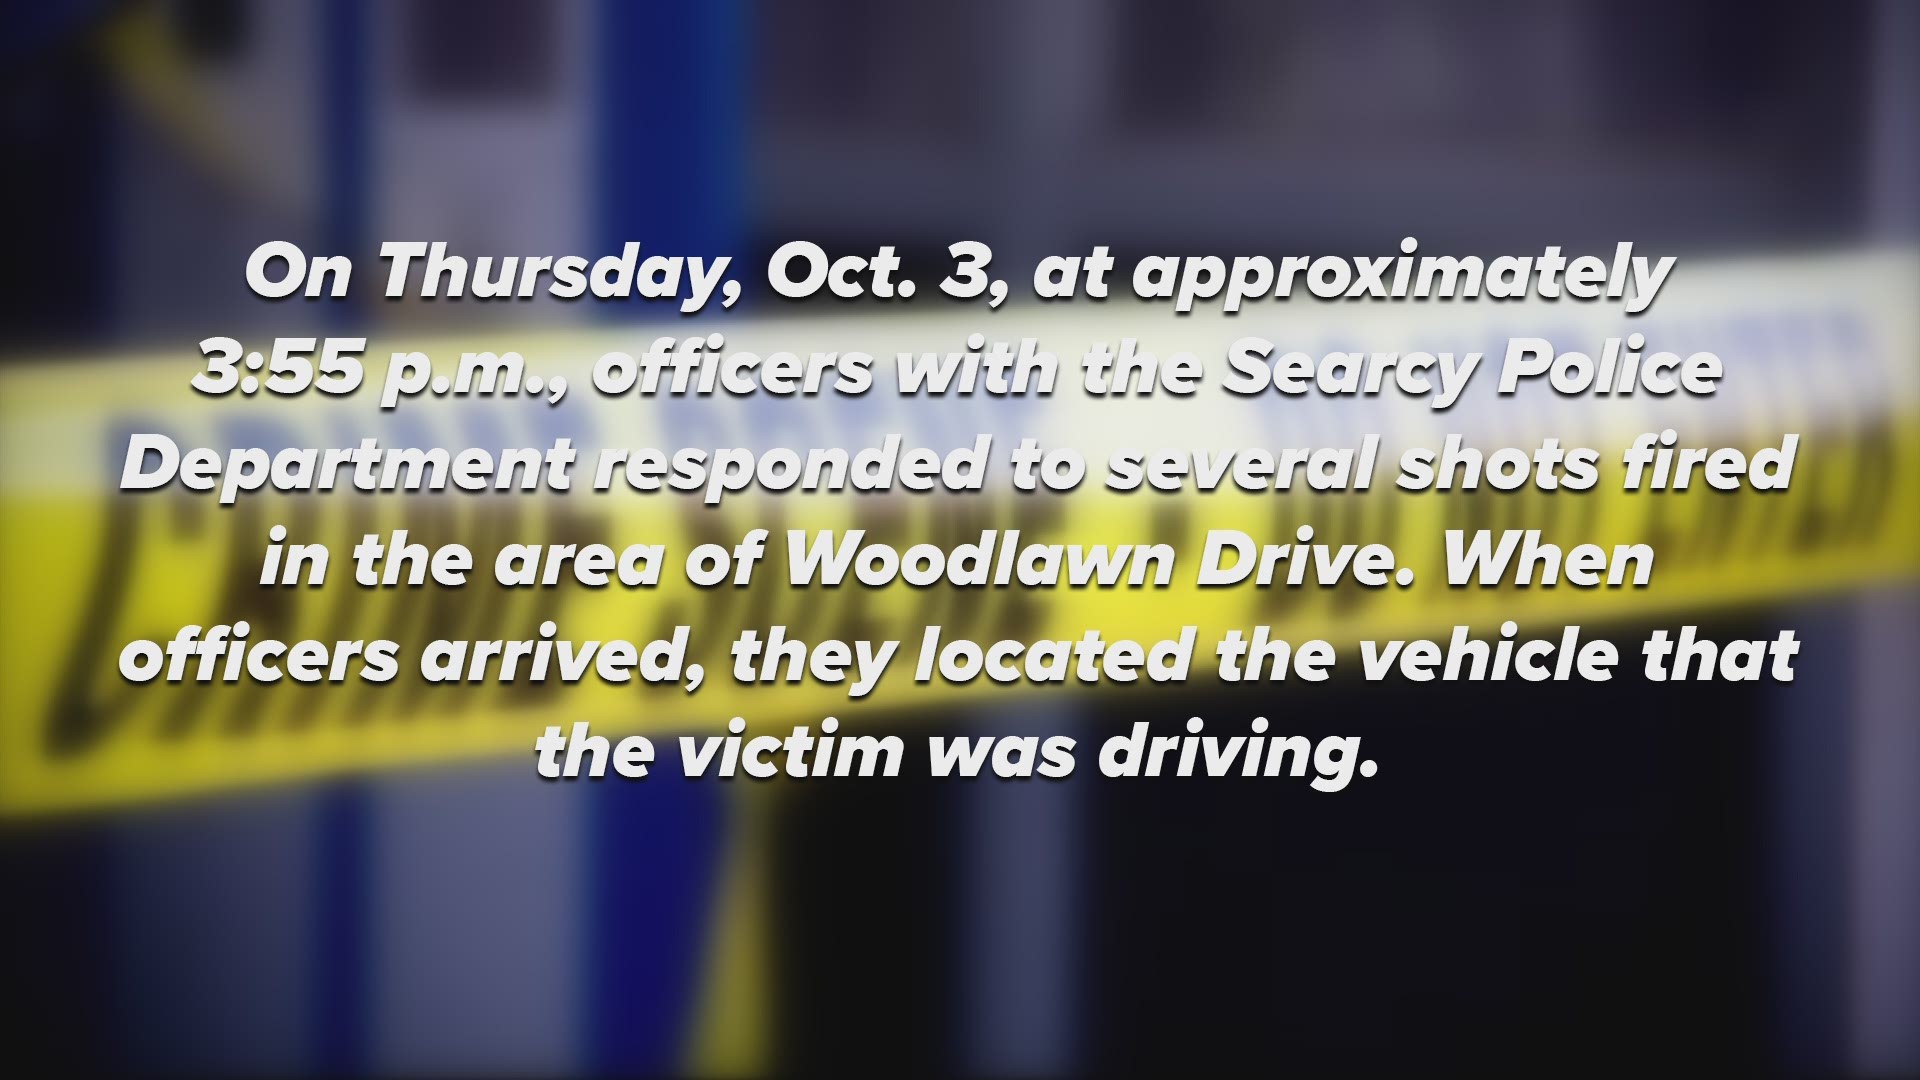 Officers with the Searcy Police Department responded to several shots fired in the area of Woodlawn Drive.